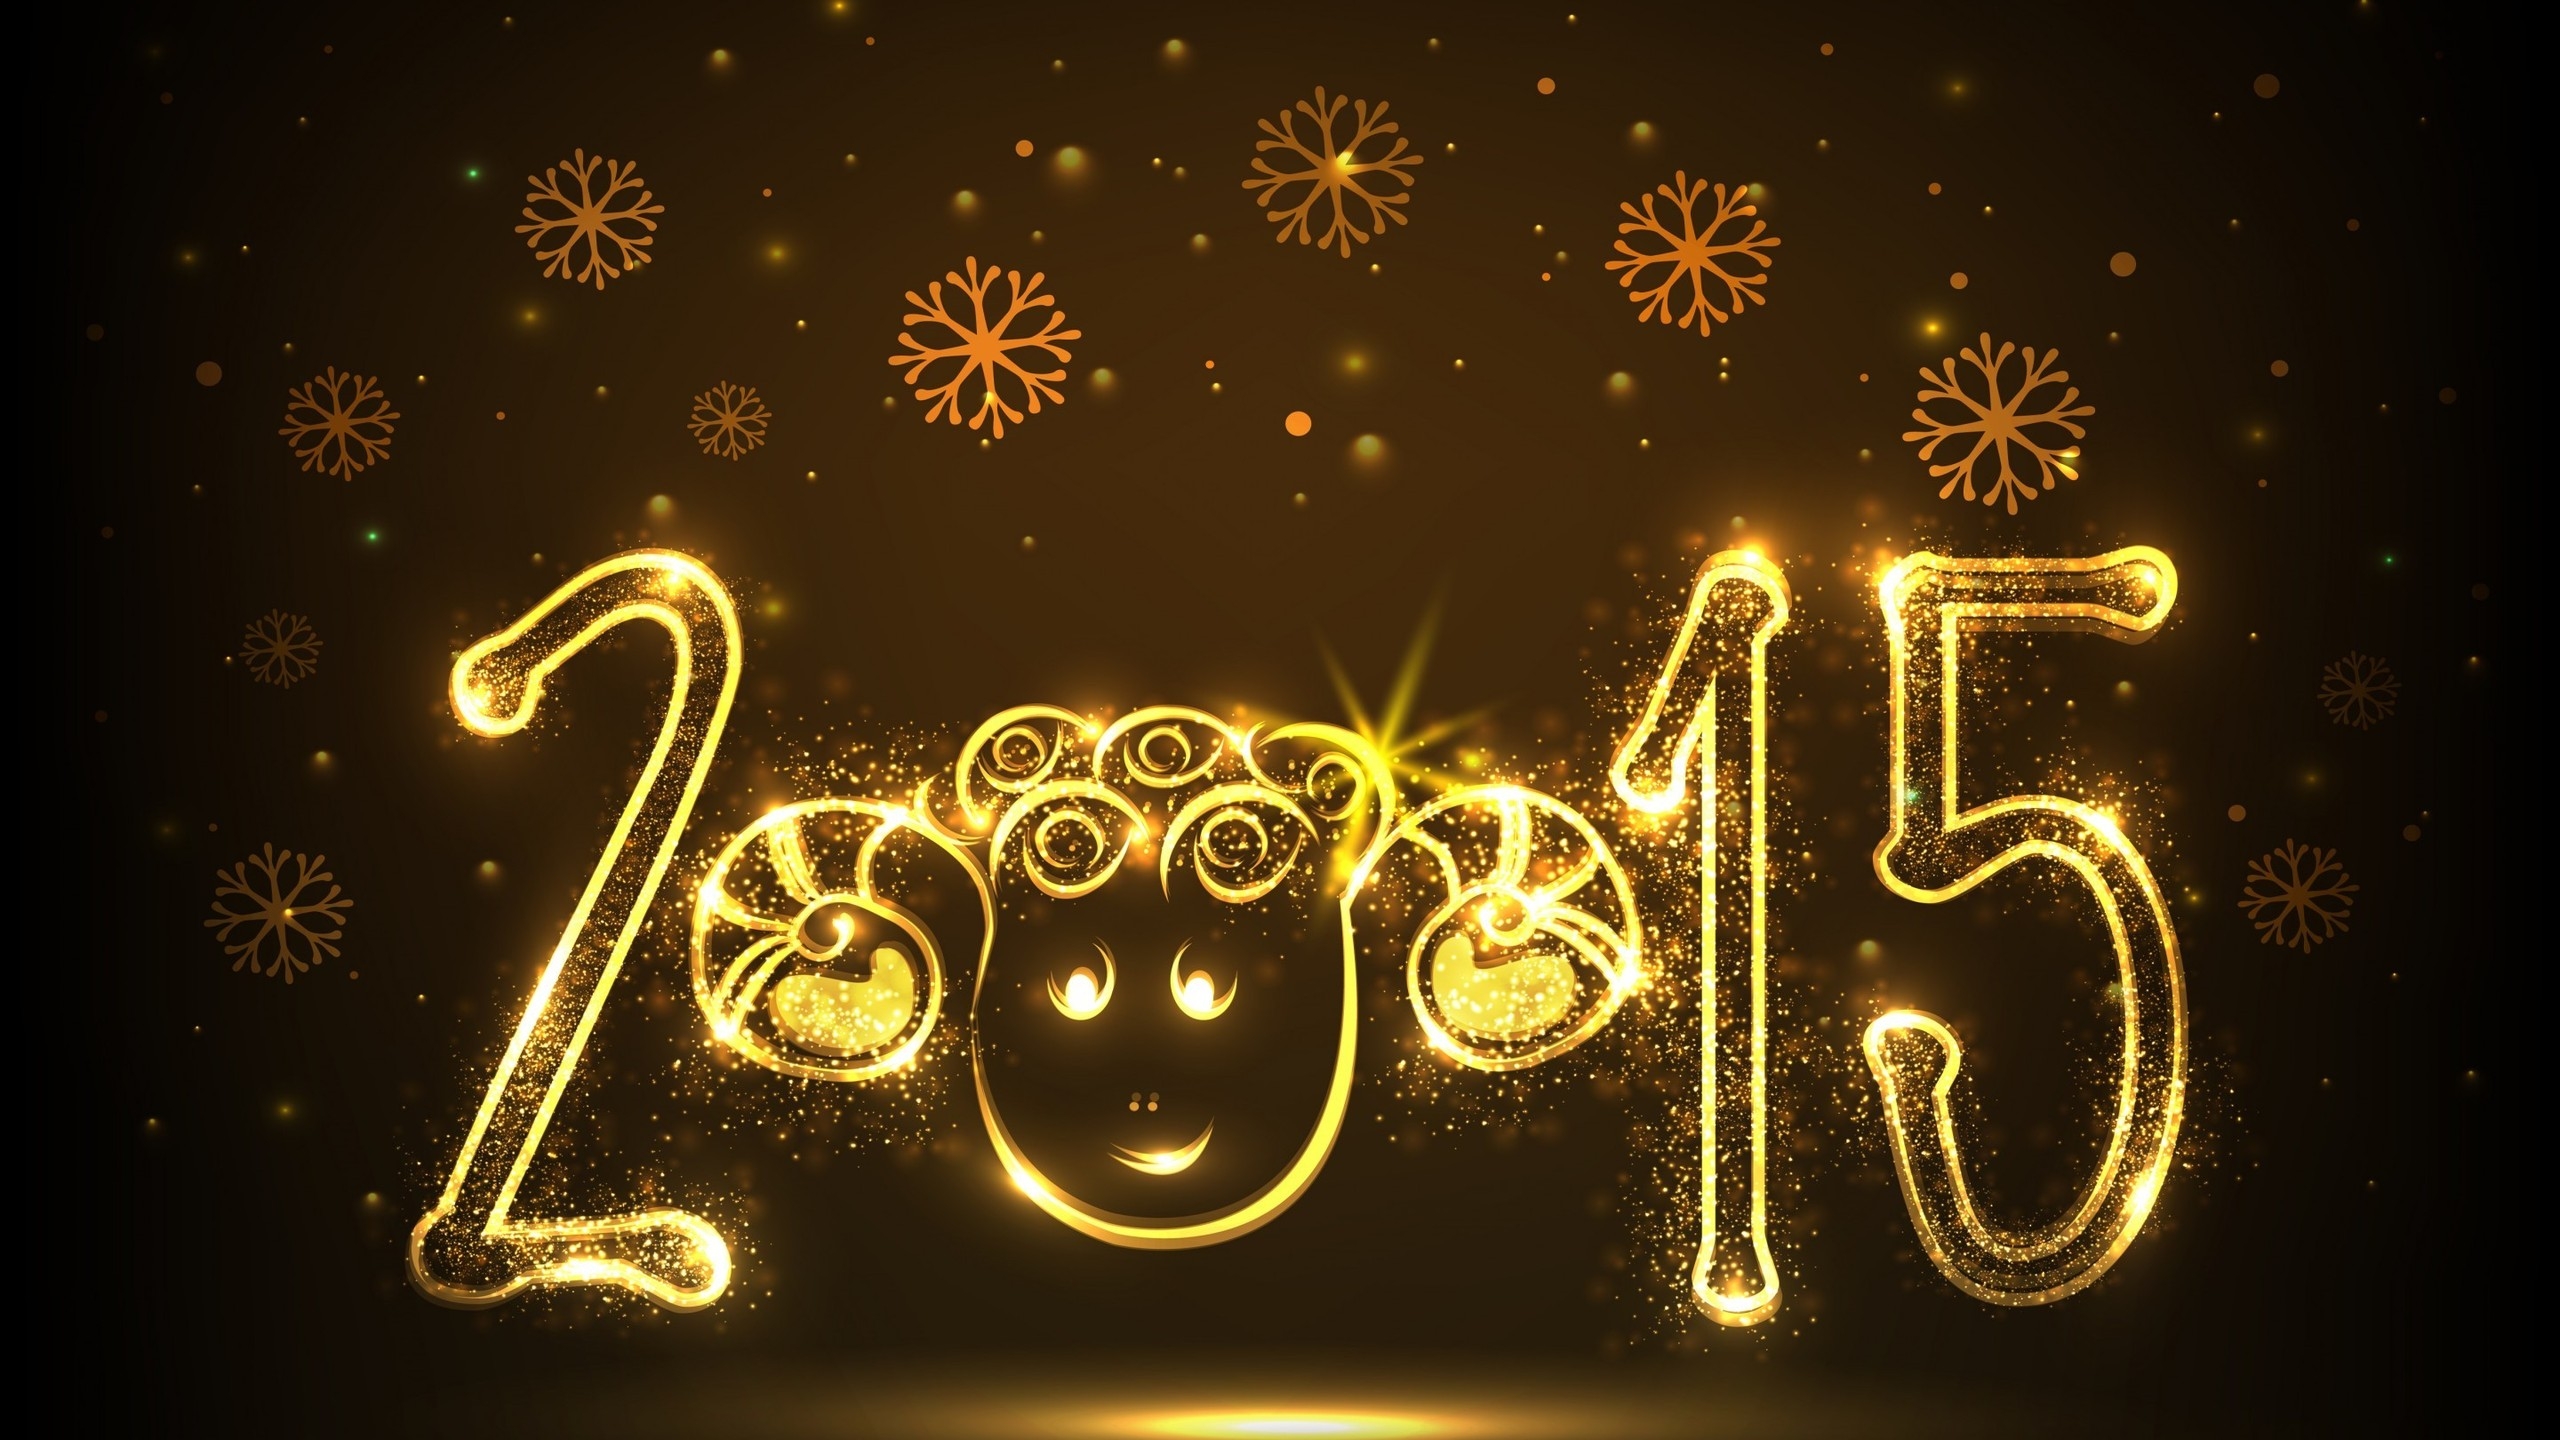 New Year Funny Face for 2560x1440 HDTV resolution